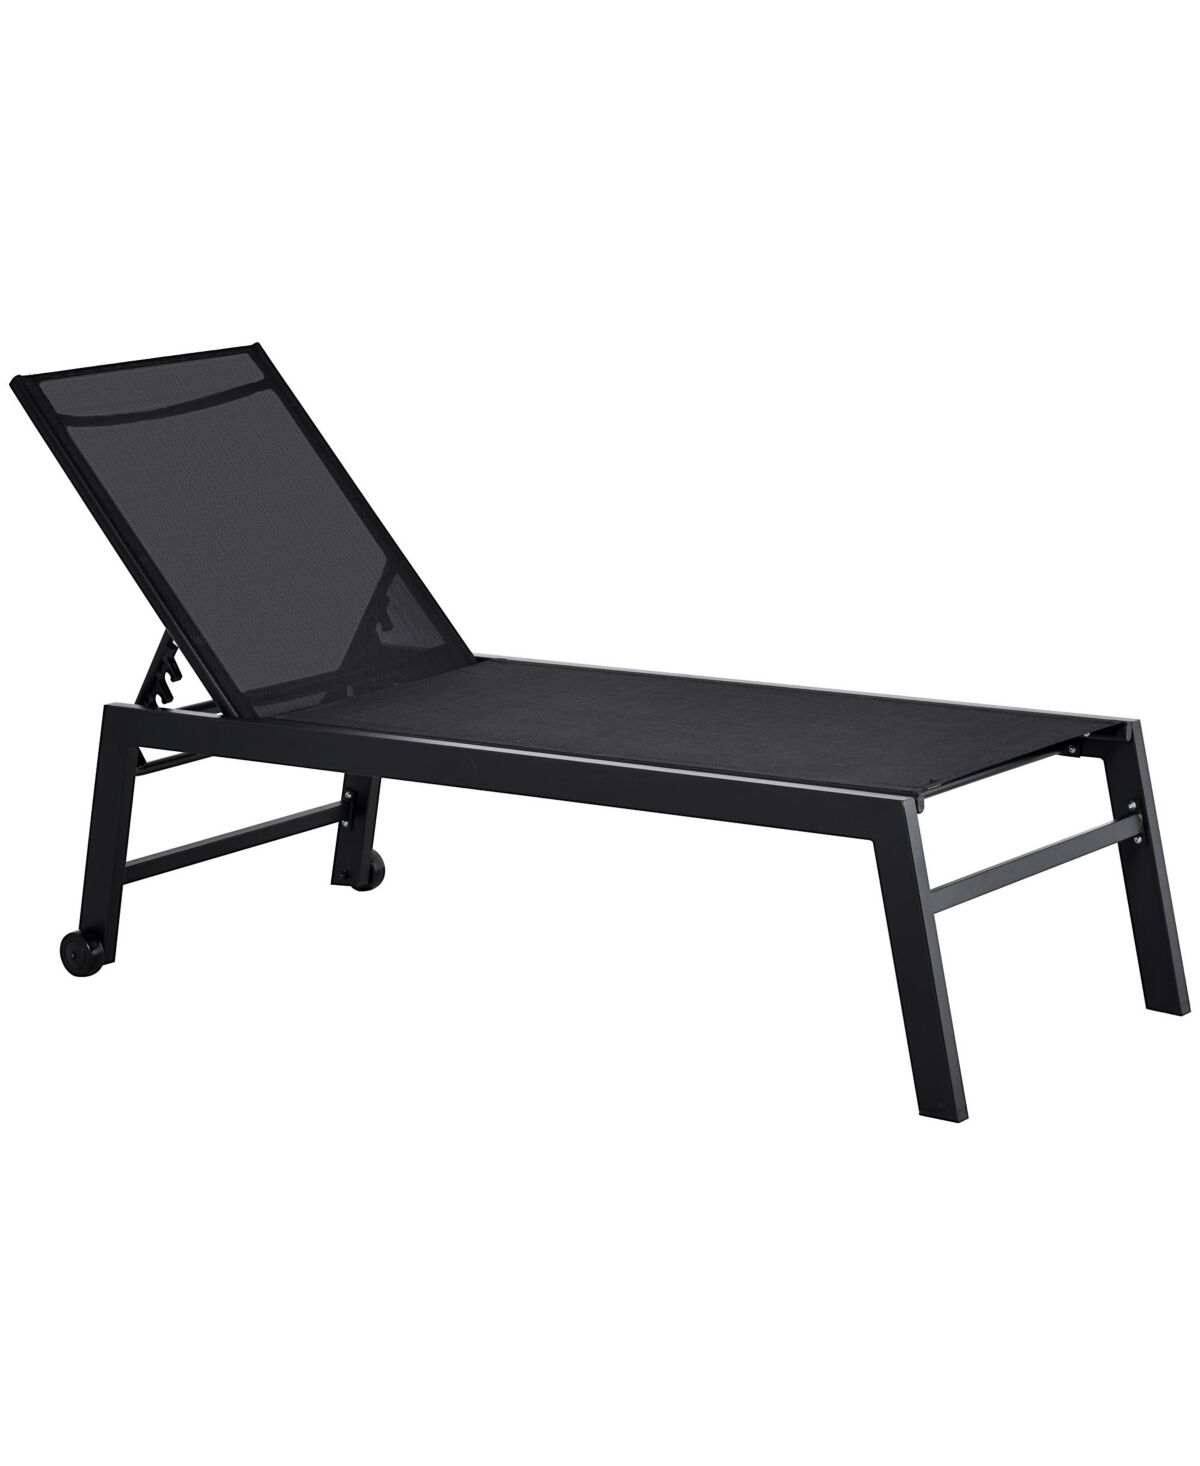 Outsunny Patio Garden Sun Chaise Lounge Chair with 5-Position Backrest, 2 Back Wheels, & Industrial Design, Black - Black